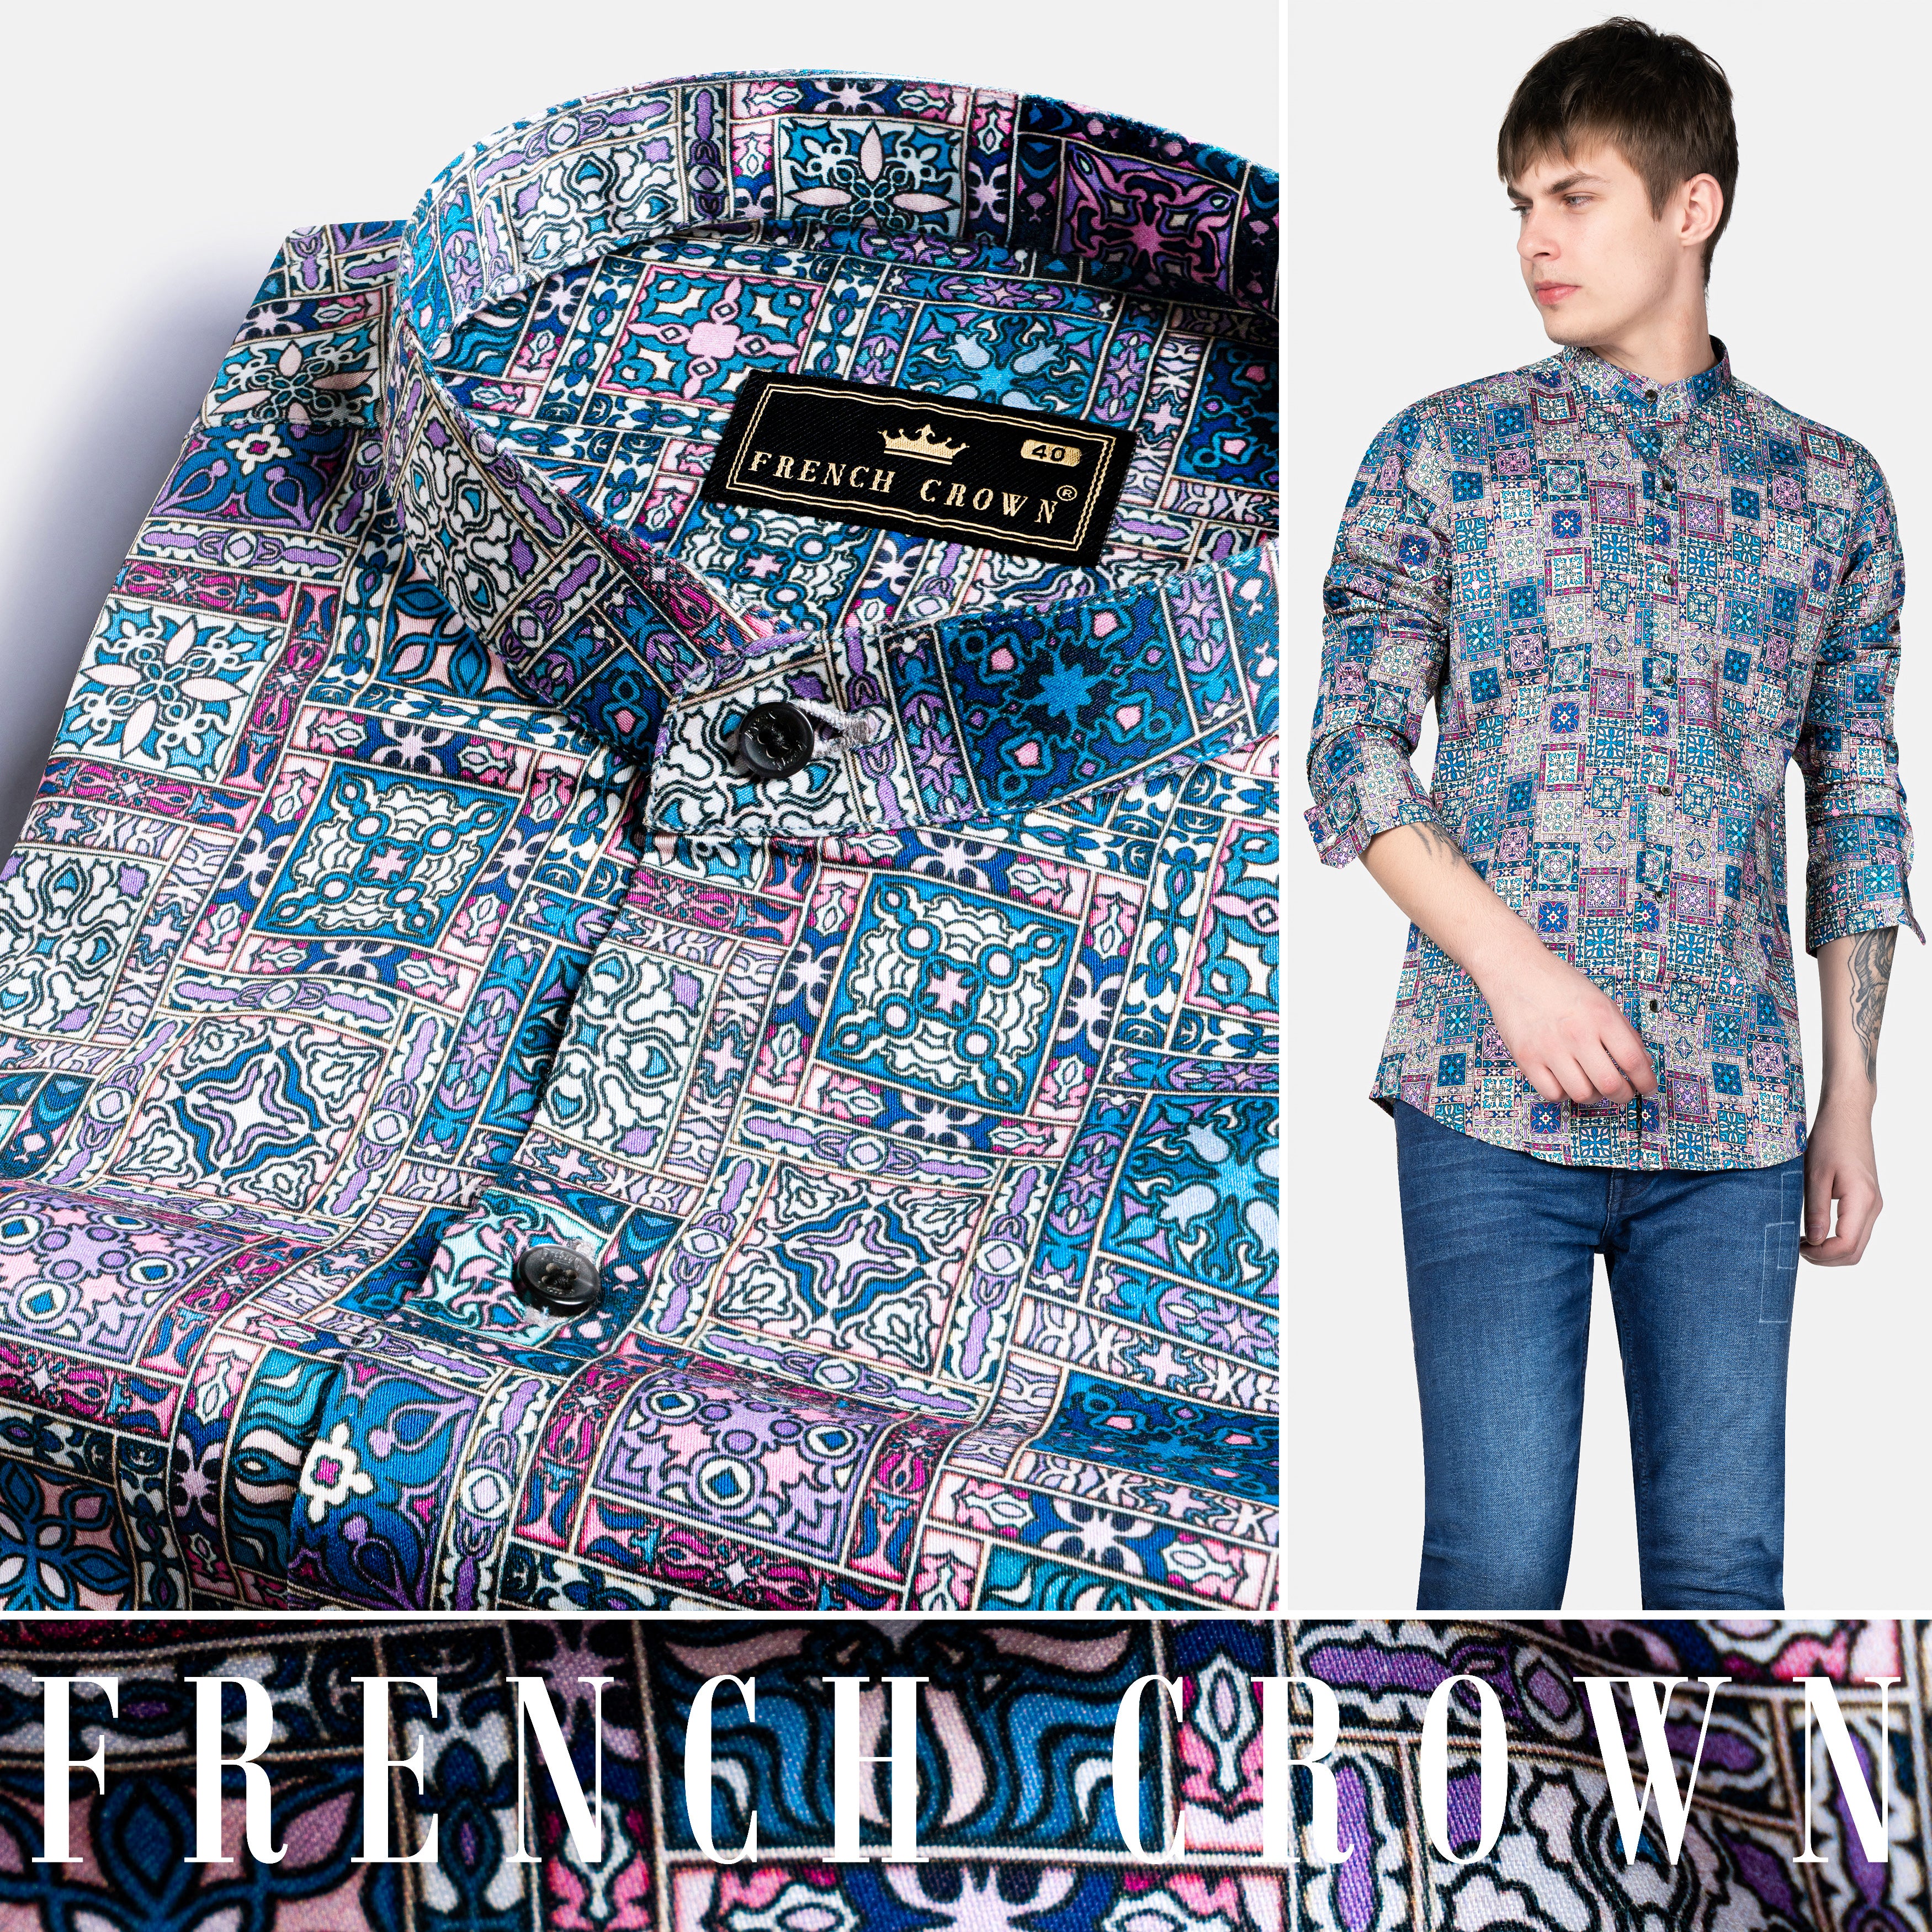 Buy Lilac Floral Full Sleeves Cotton Printed Shirt For Men Online